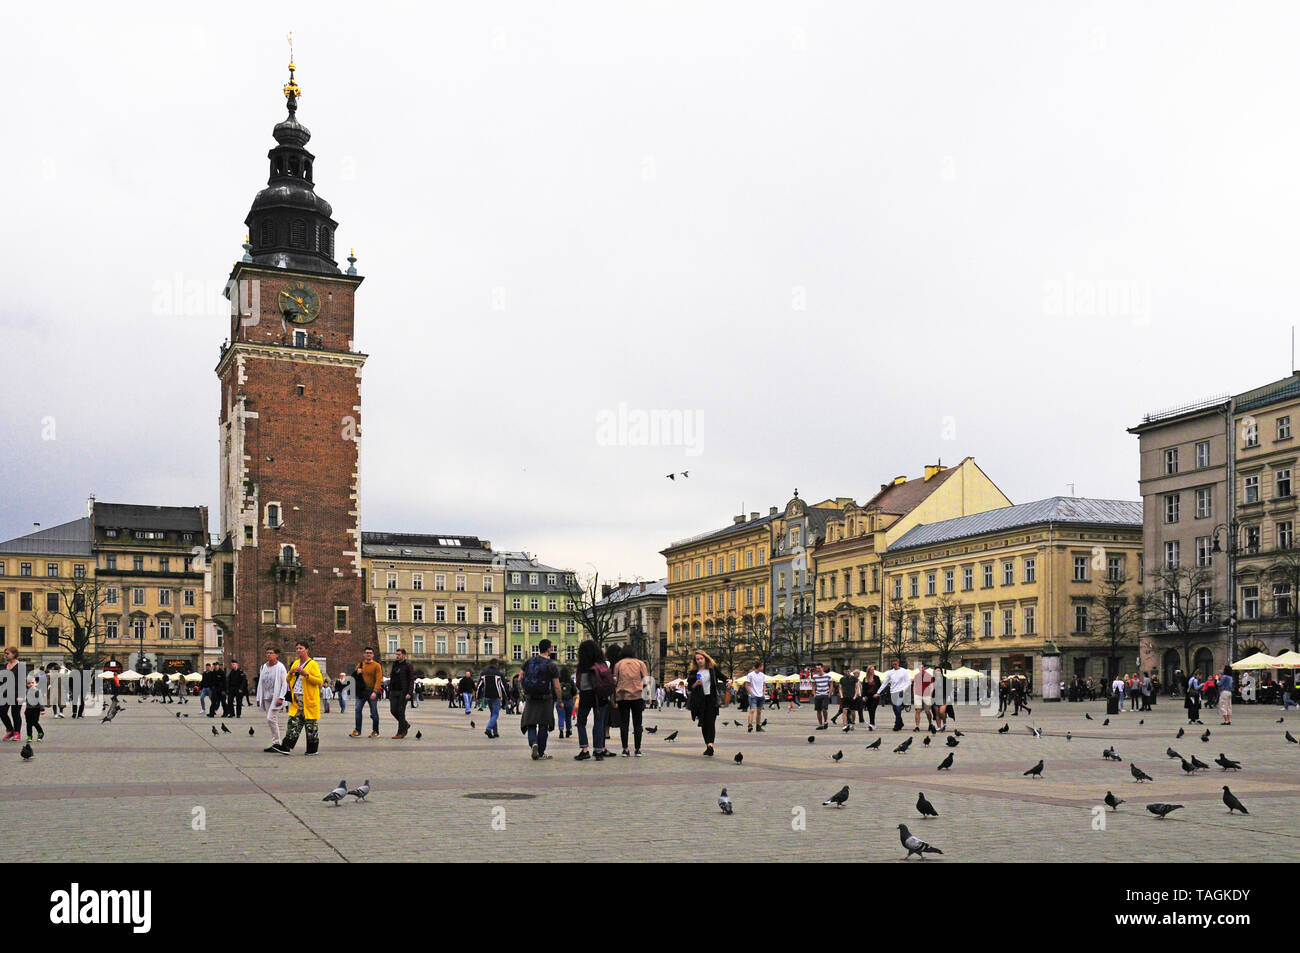 Old City Square and town hall tower, Krakow, Poland. Stock Photo